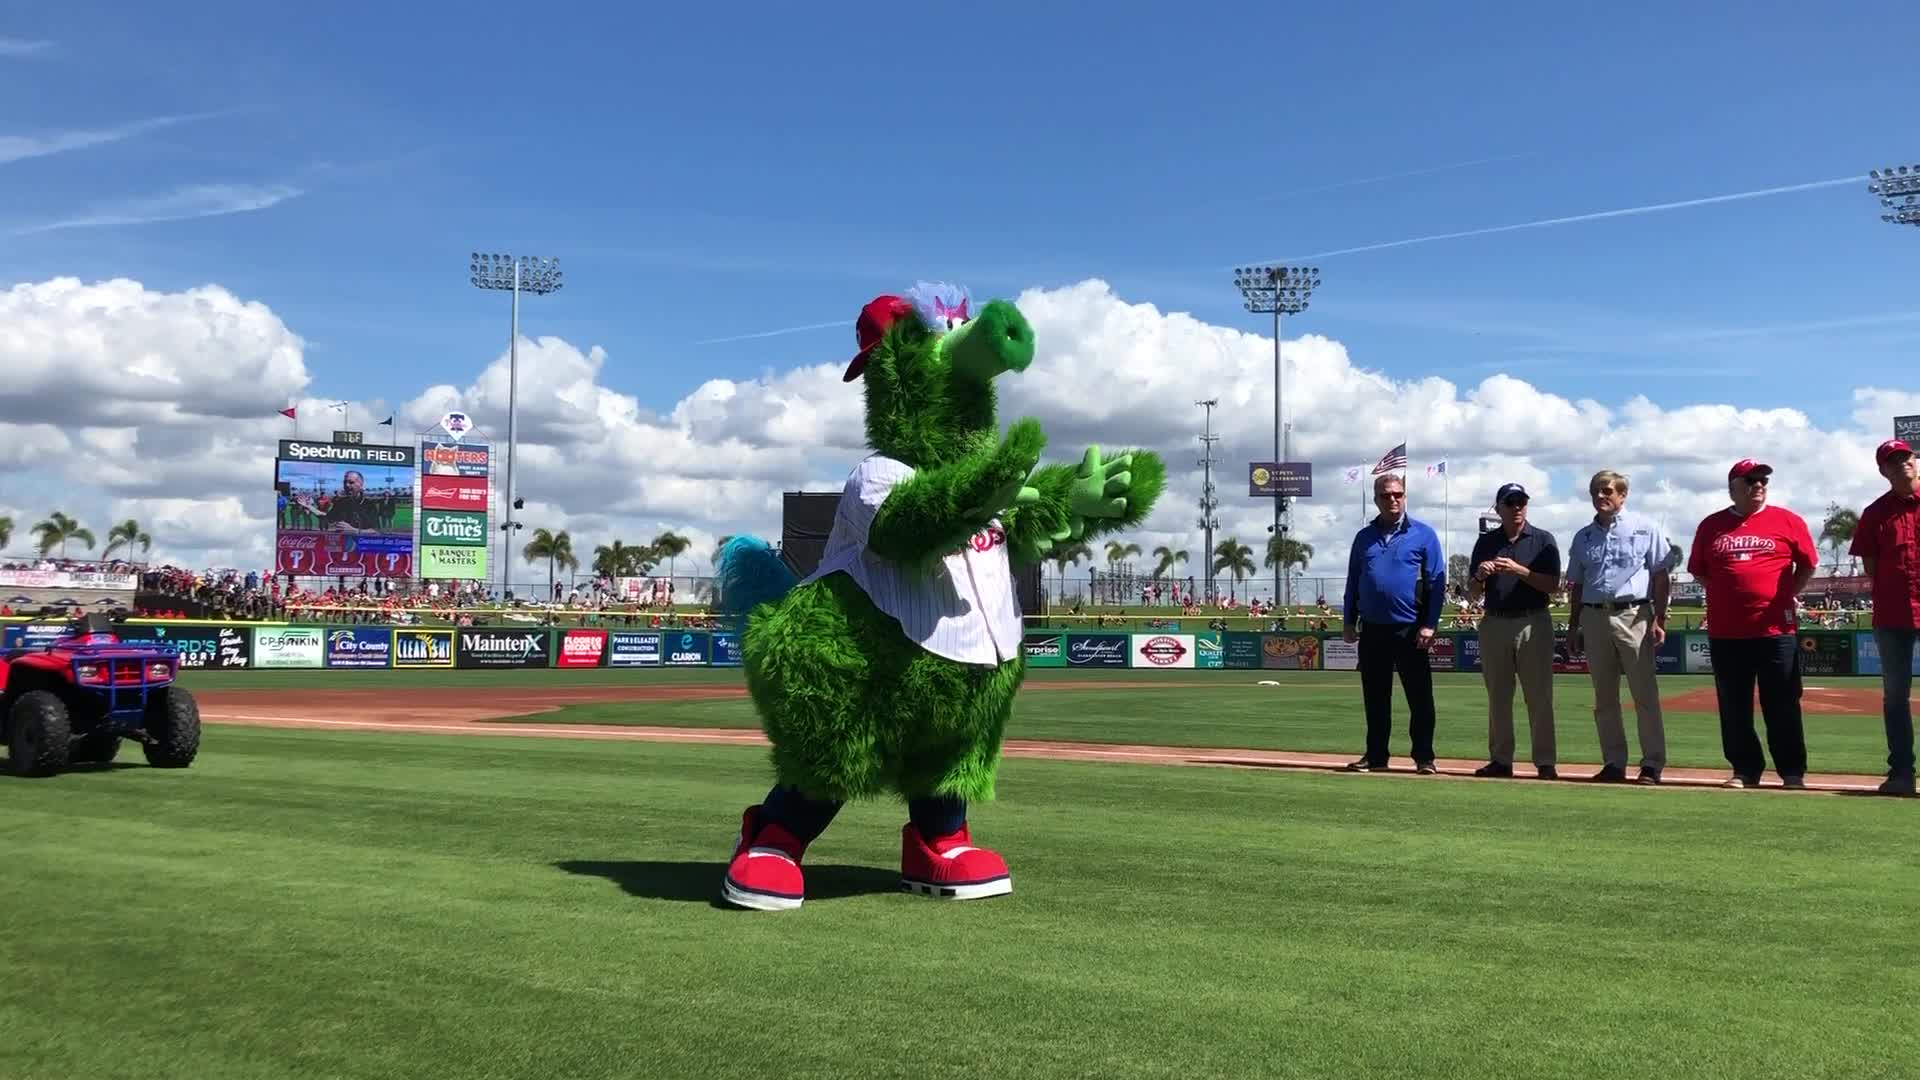 Phillie Phanatic's new look: What do you think?